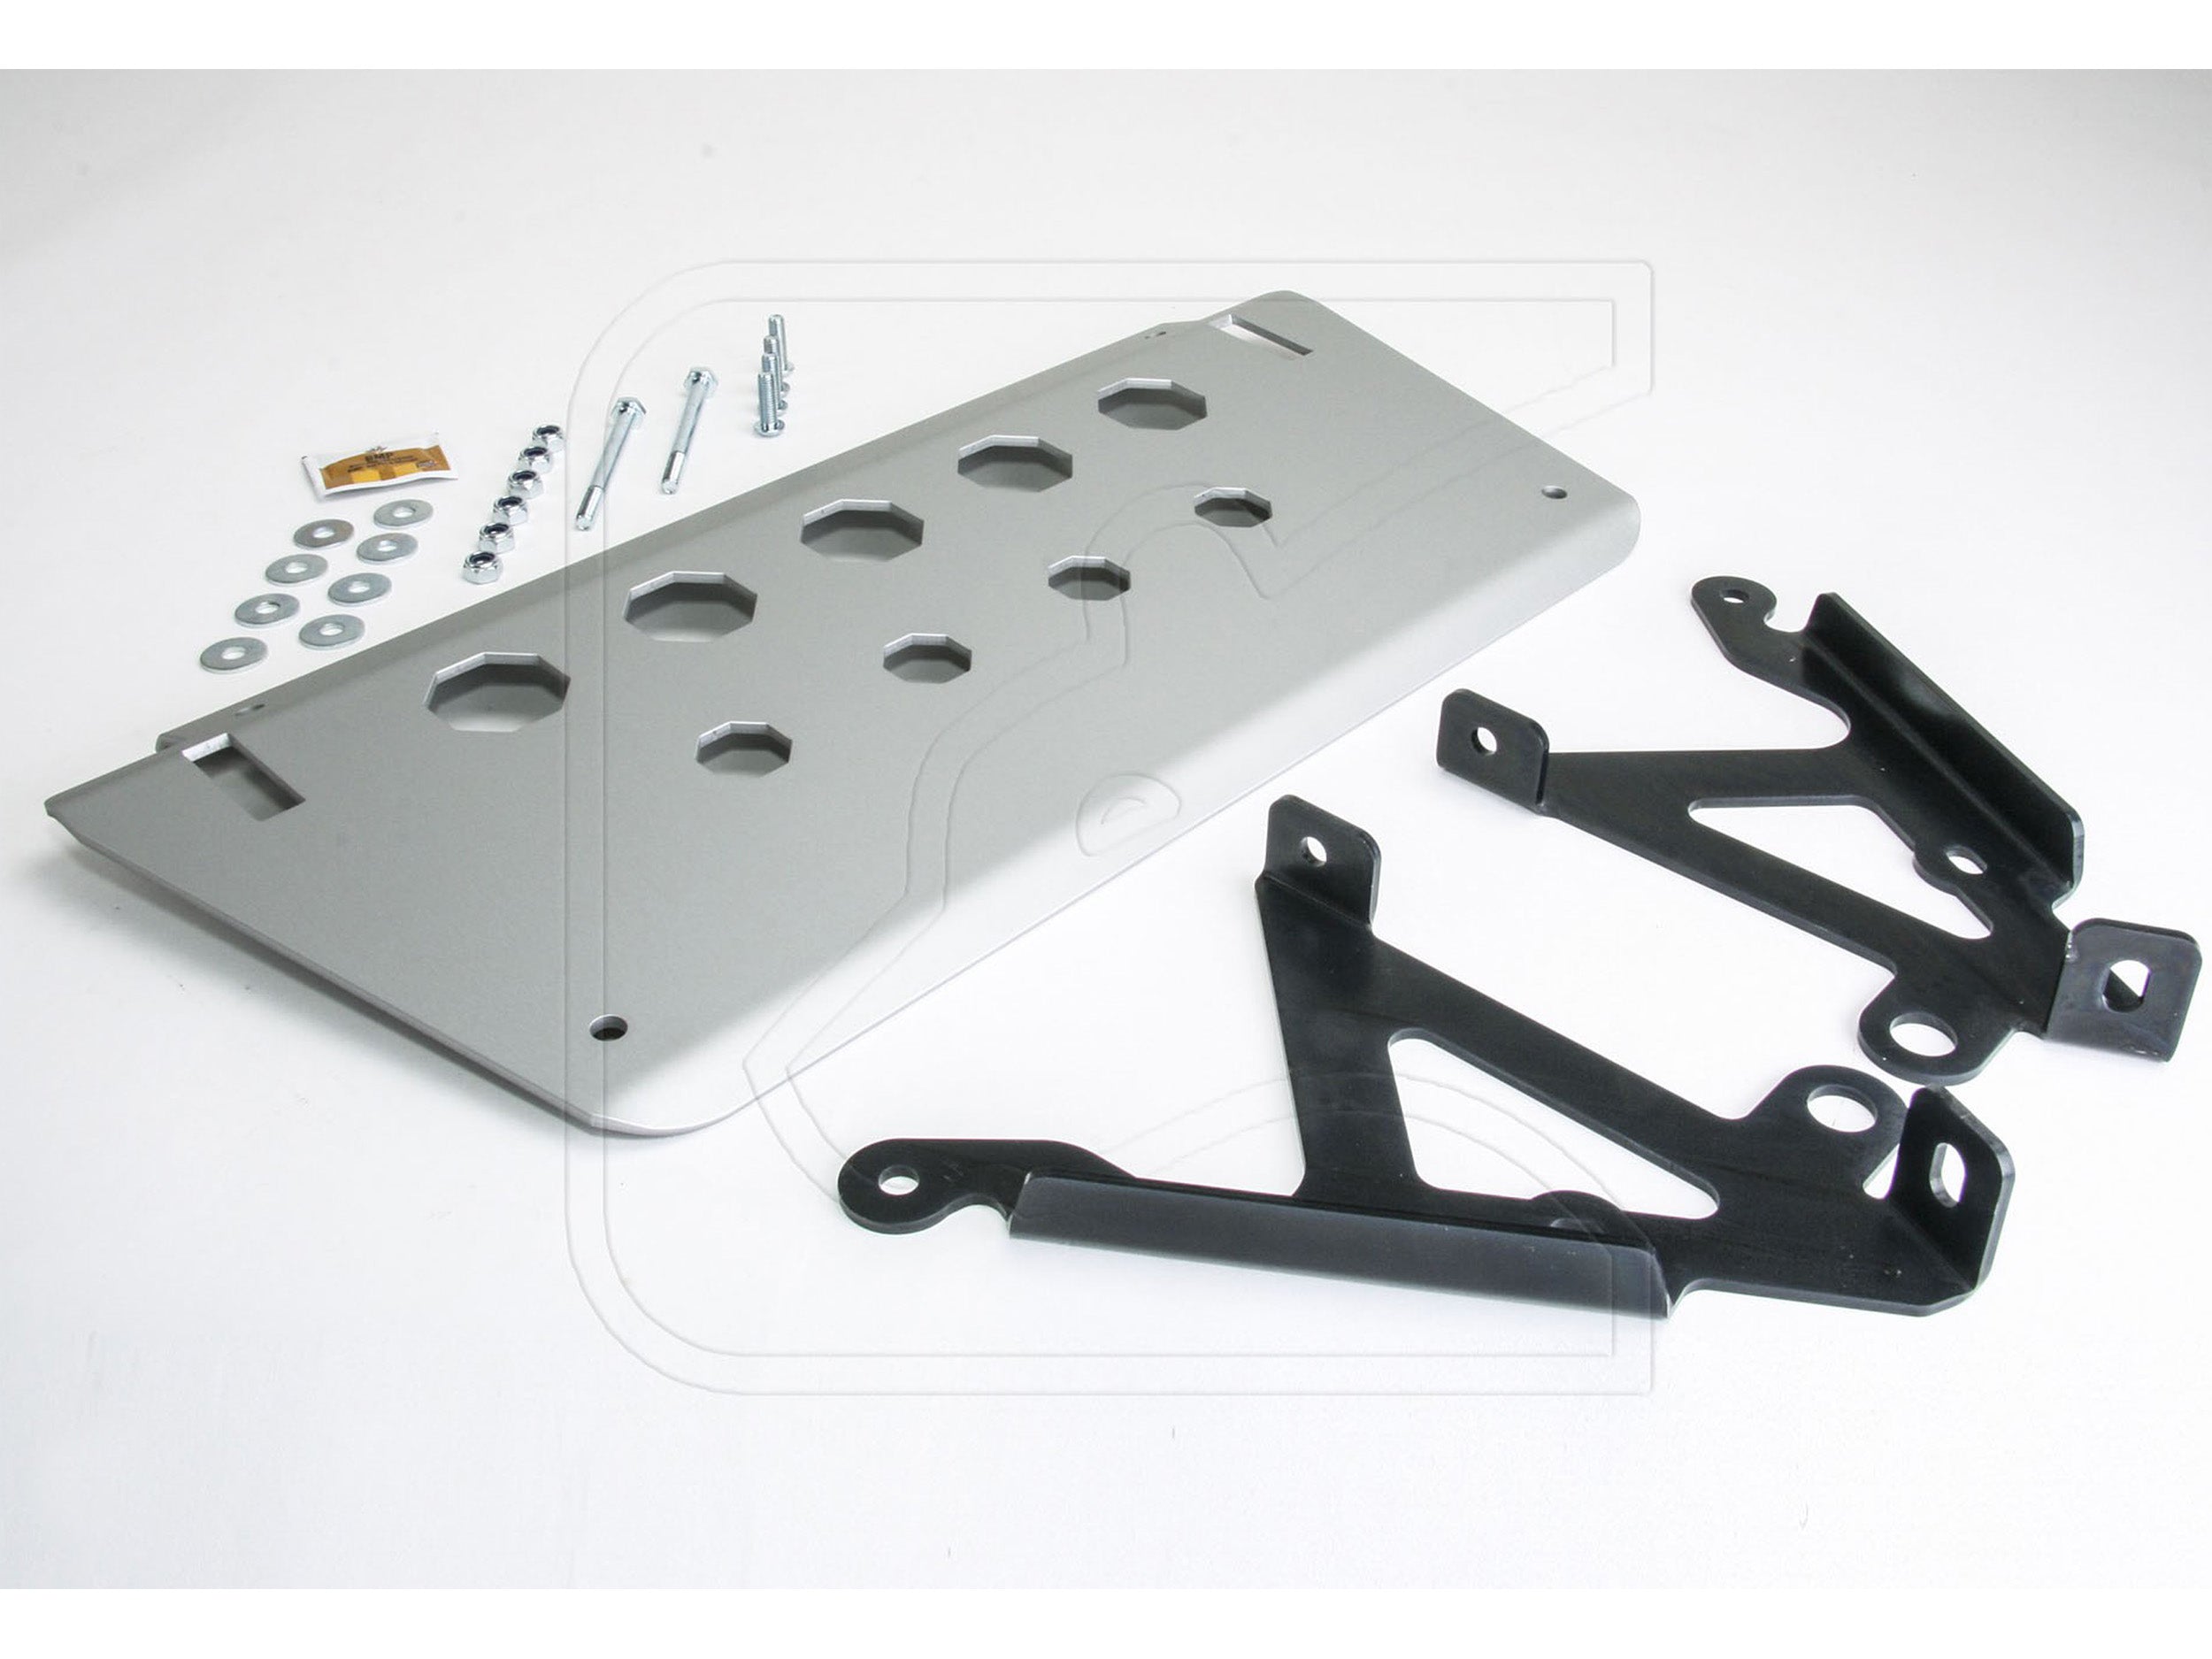 Defender Aluminum Steering Guard / Skid Plate and Mounting Brackets - for Land Rover 90/110/130